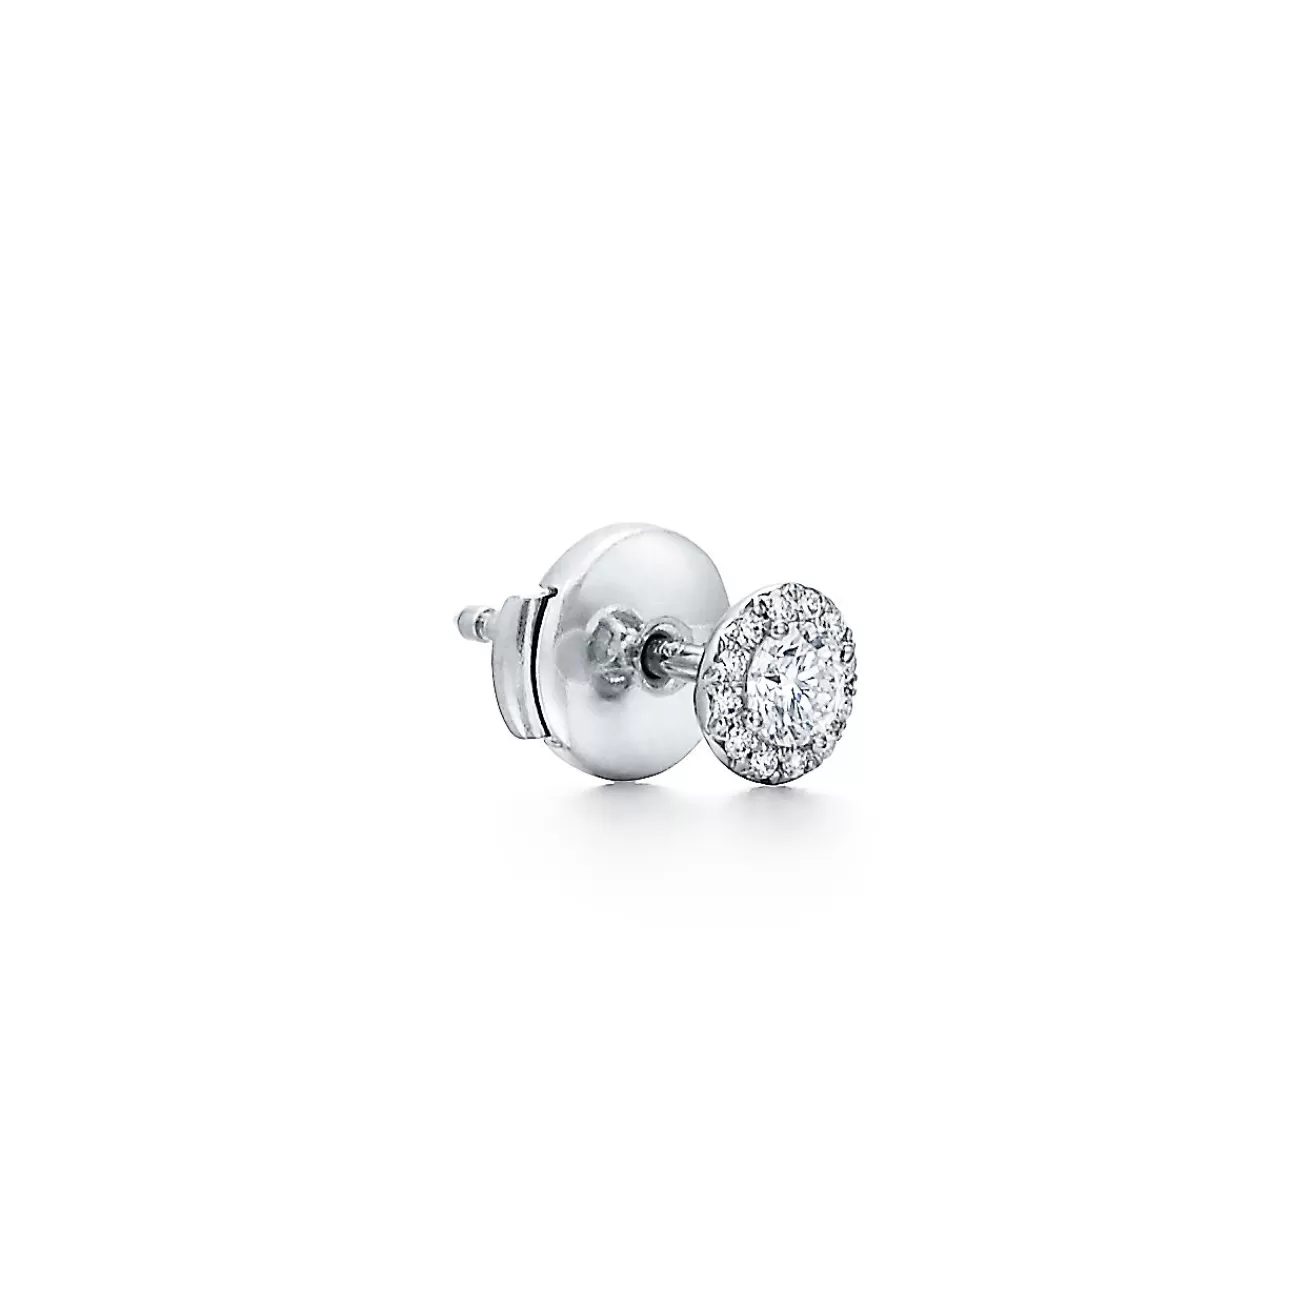 Tiffany & Co. Tiffany Soleste® earrings in platinum with diamonds. | ^ Earrings | Gifts for Her